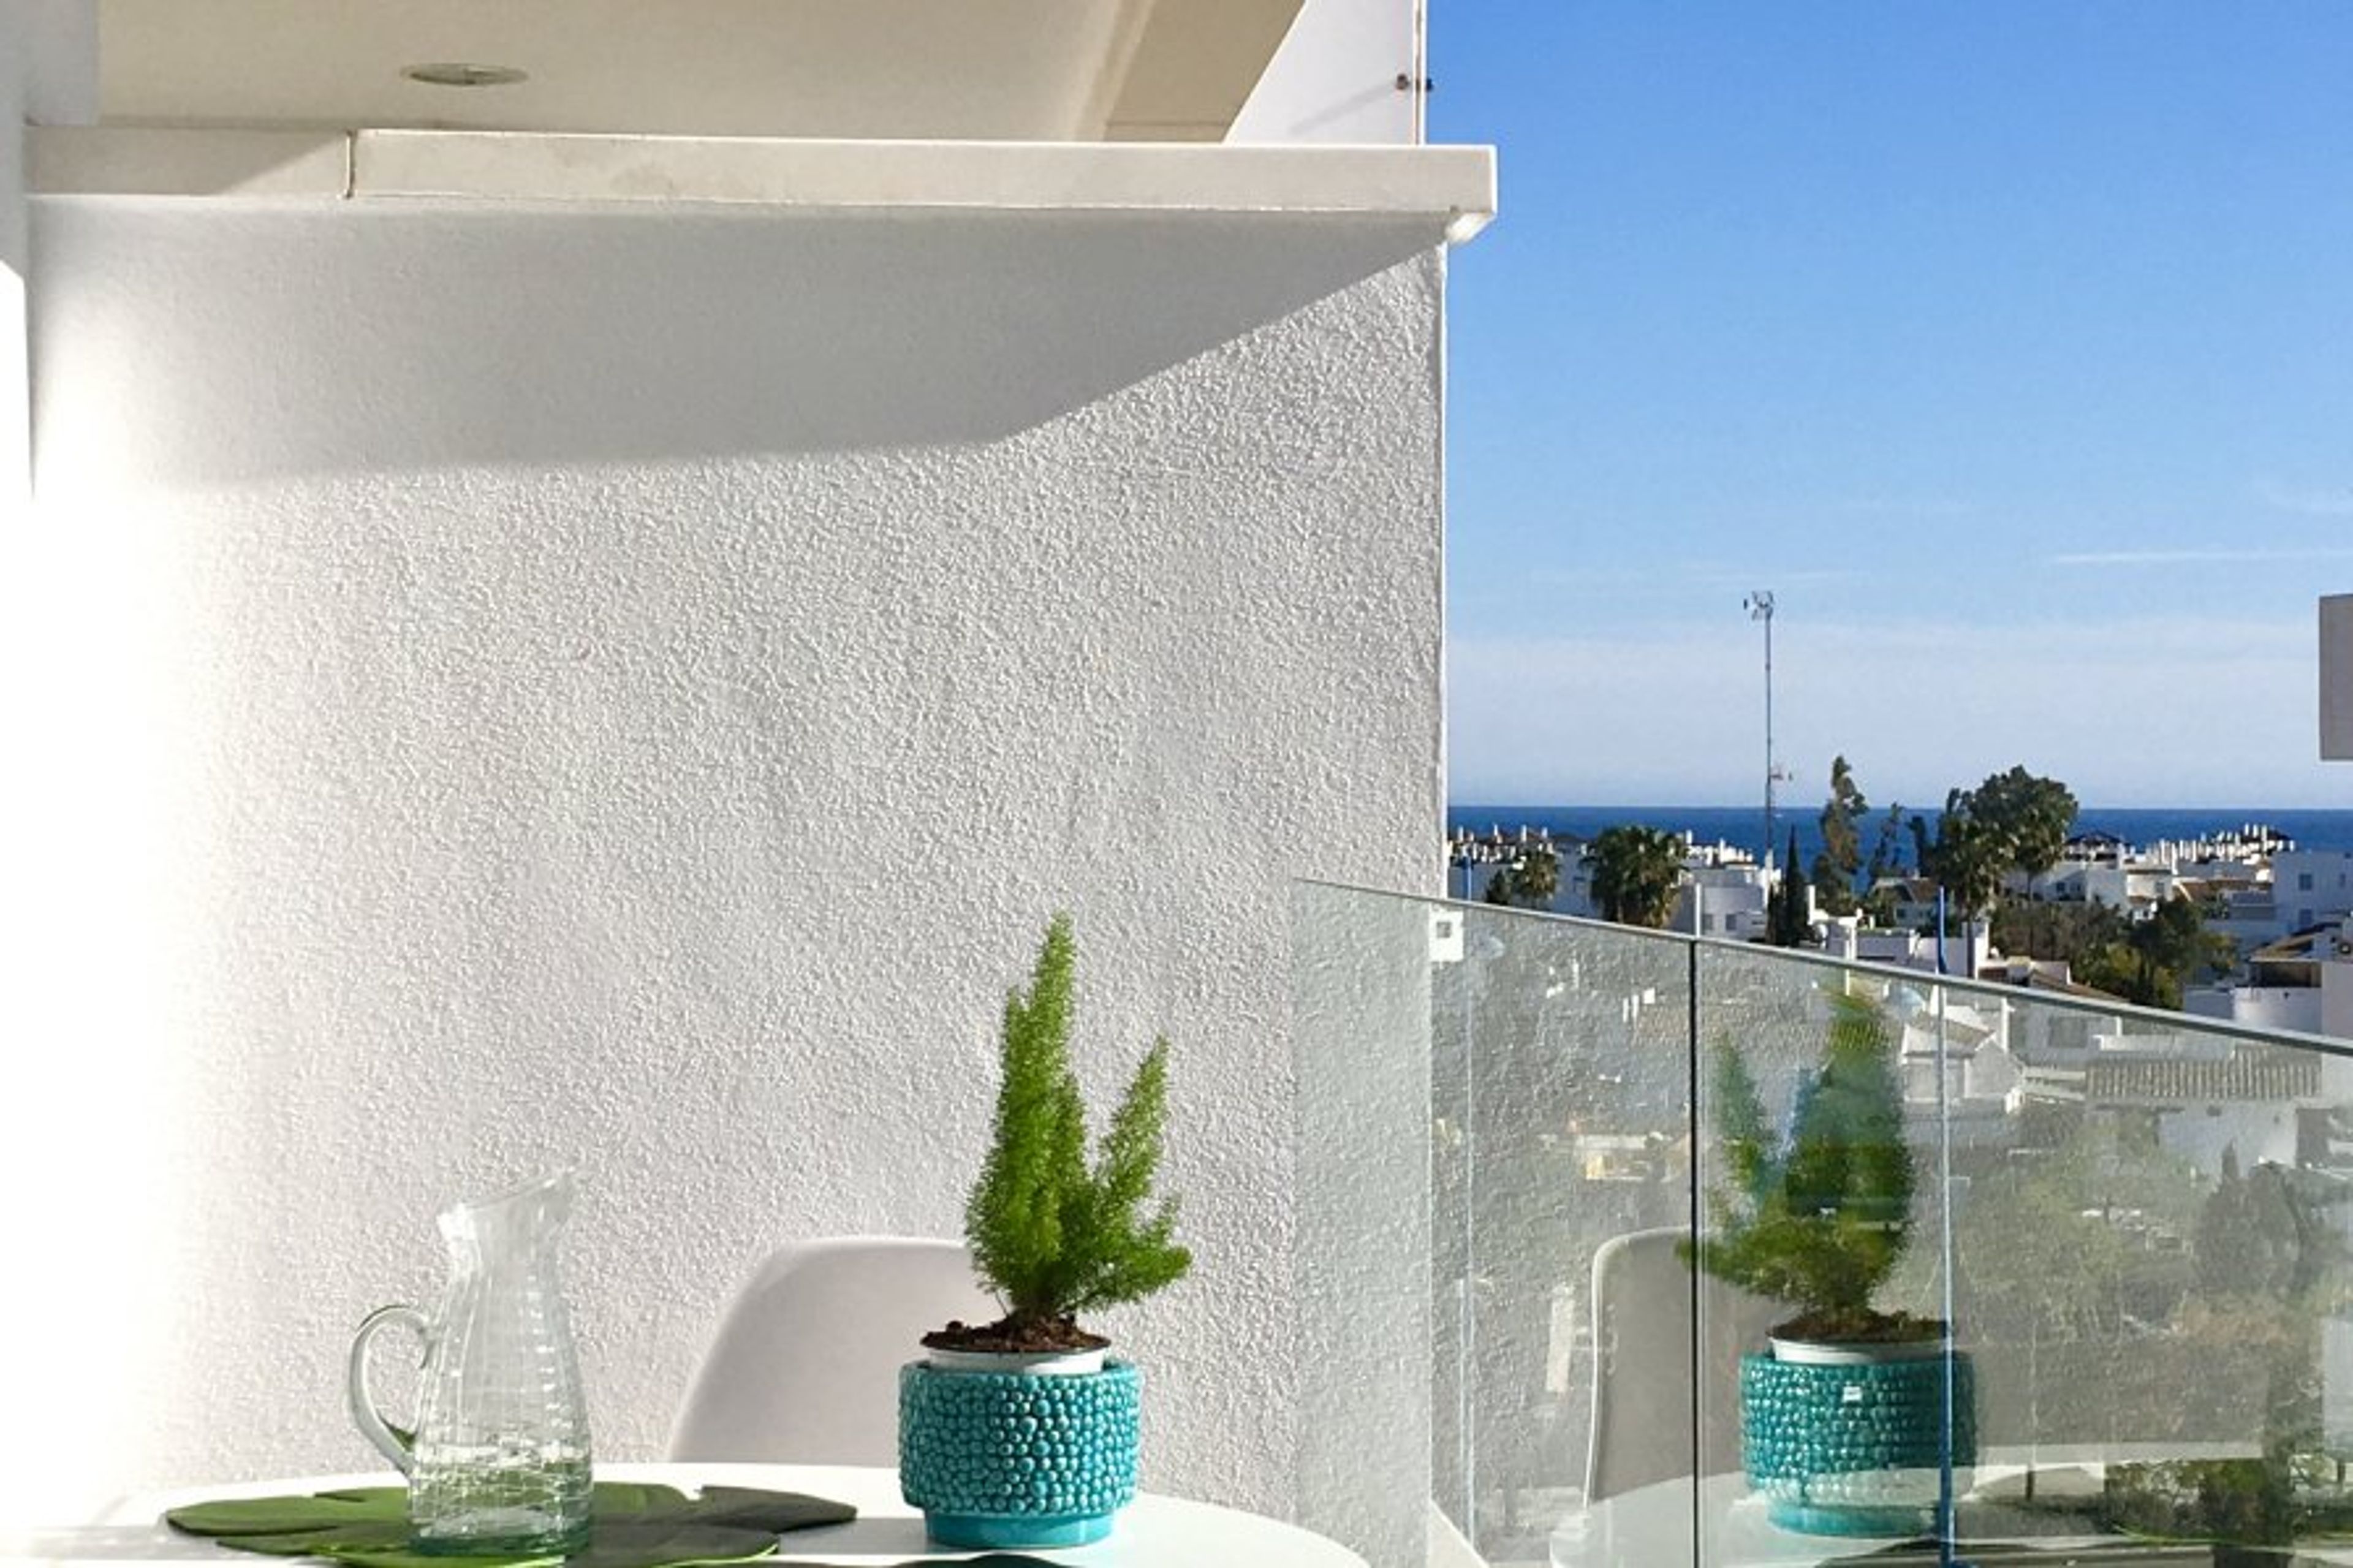 Enjoy the terrace with views to the sea and pool